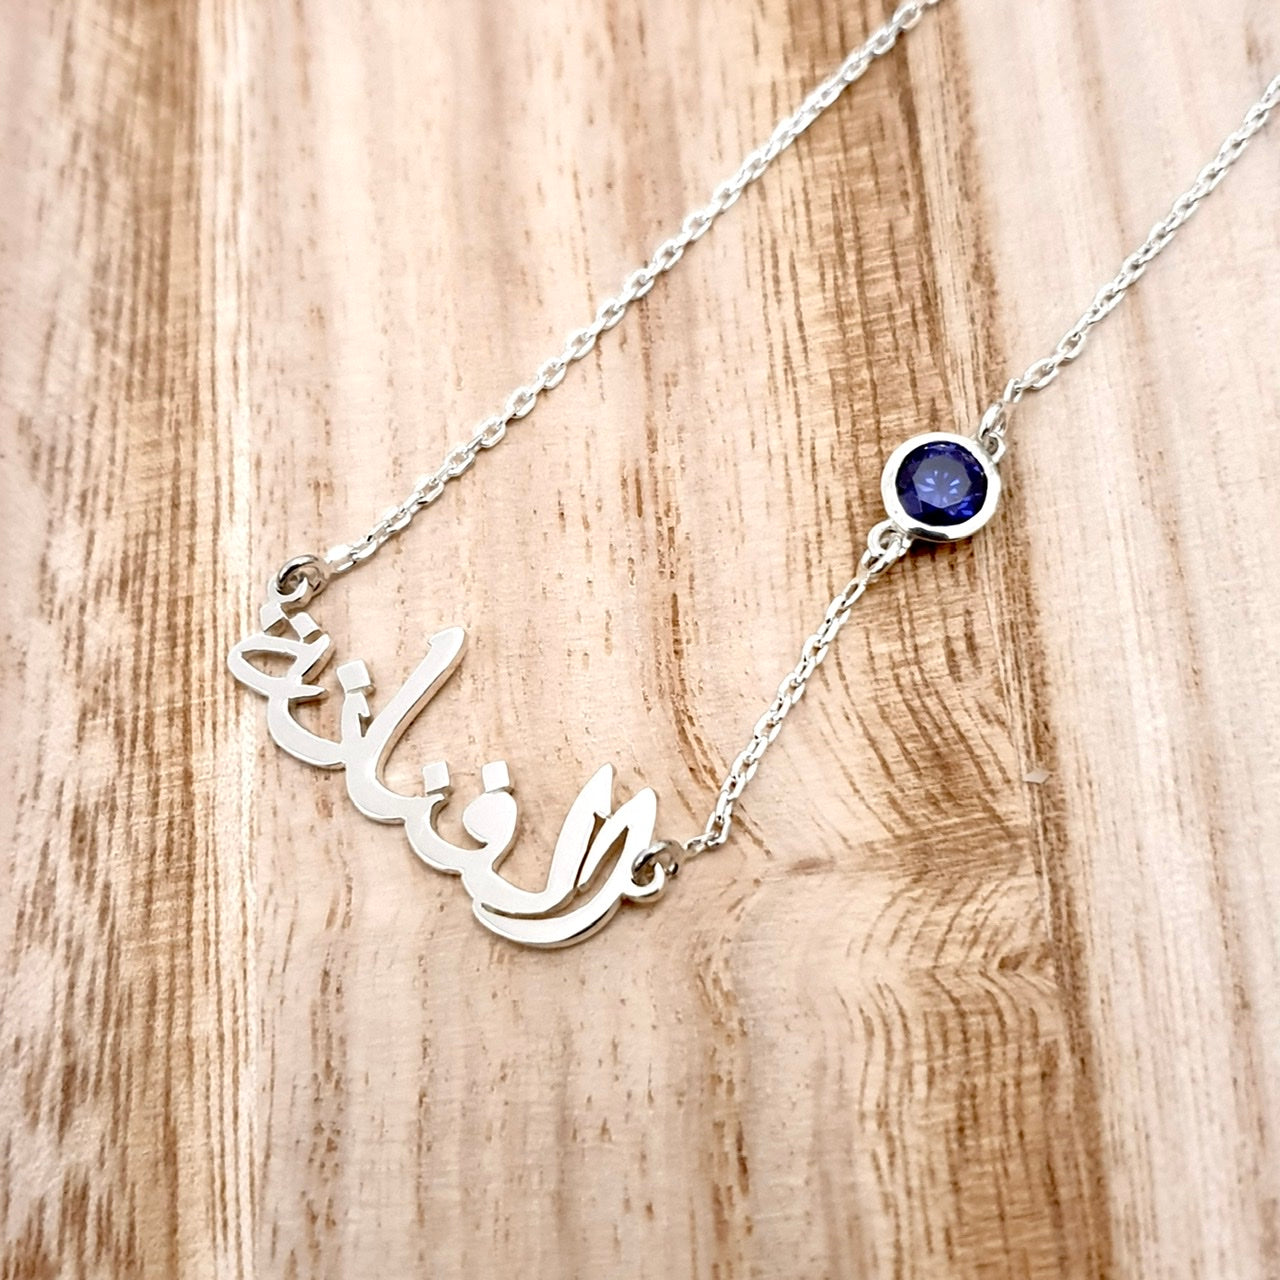 Arabic Name Necklace Personalized Arabic Necklace Arabic Necklace Custom Arabic  Necklace Personalized Jewelry Name Necklace - Etsy